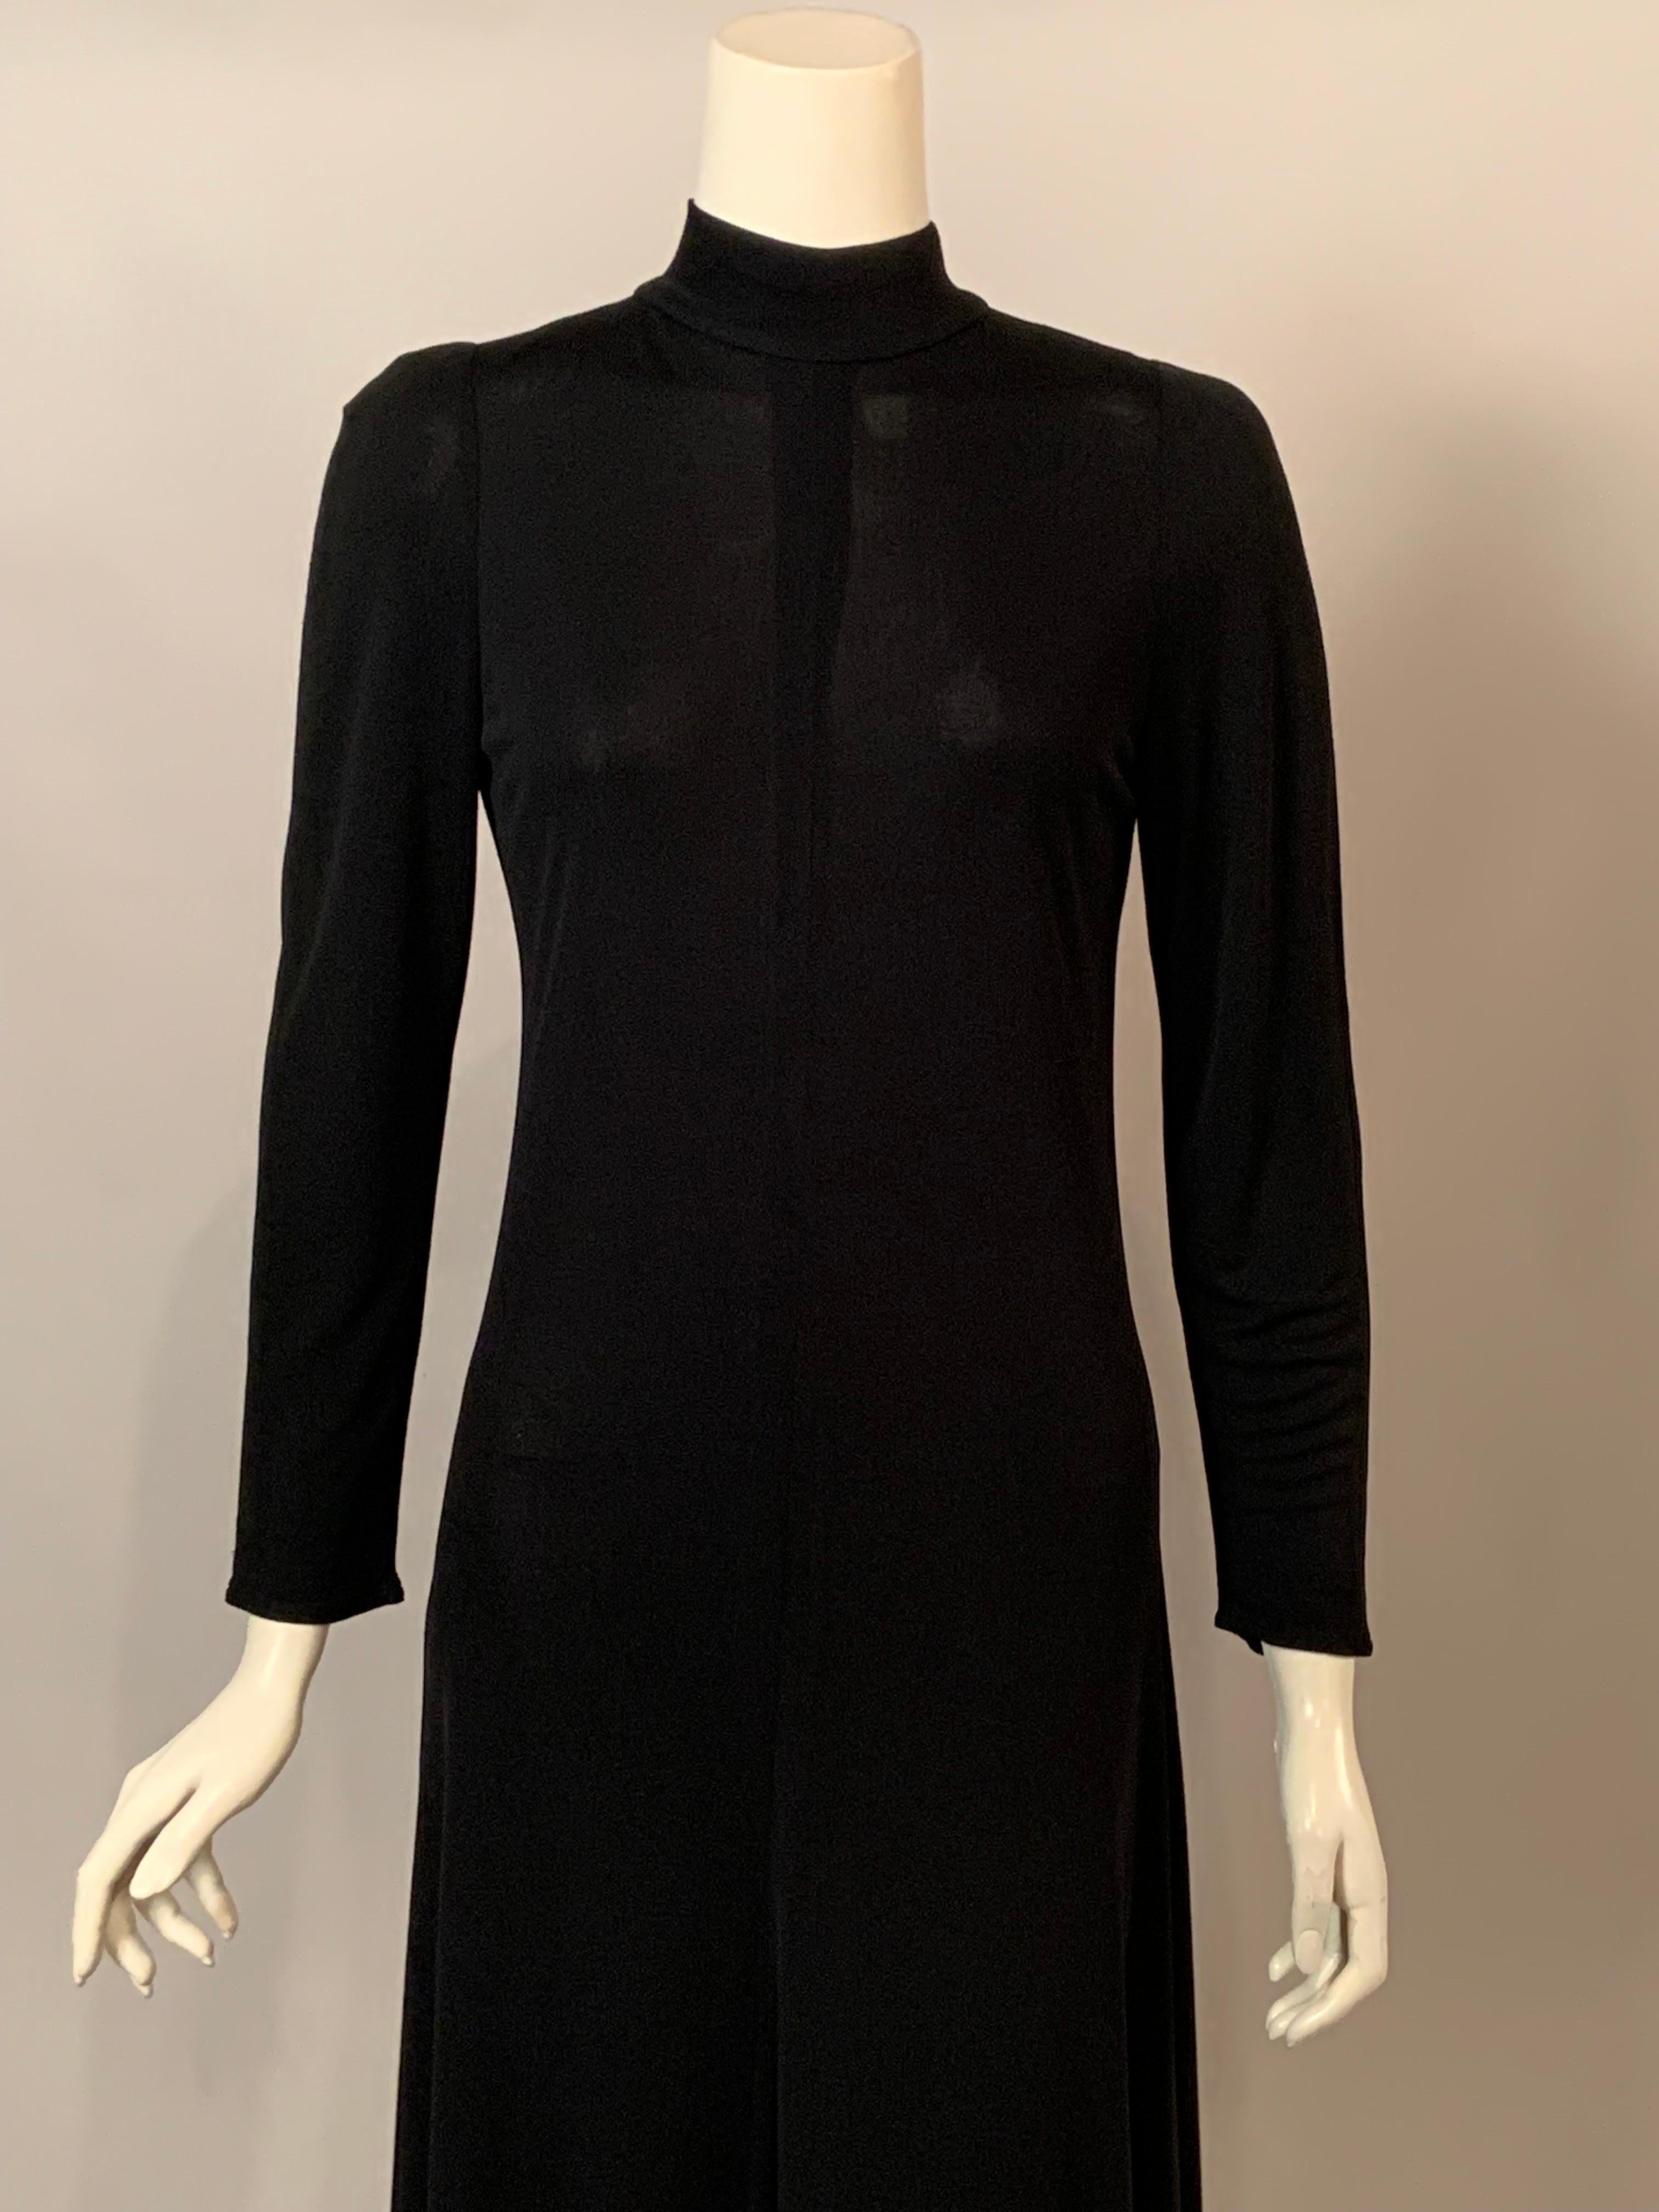 Karl Lagerfeld designed this classic little black dress for Chloe in the 1970's. The dress has a high neckline with three buttons and loops at the center back above the center back zipper.  It is in excellent condition and is marked a vintage size